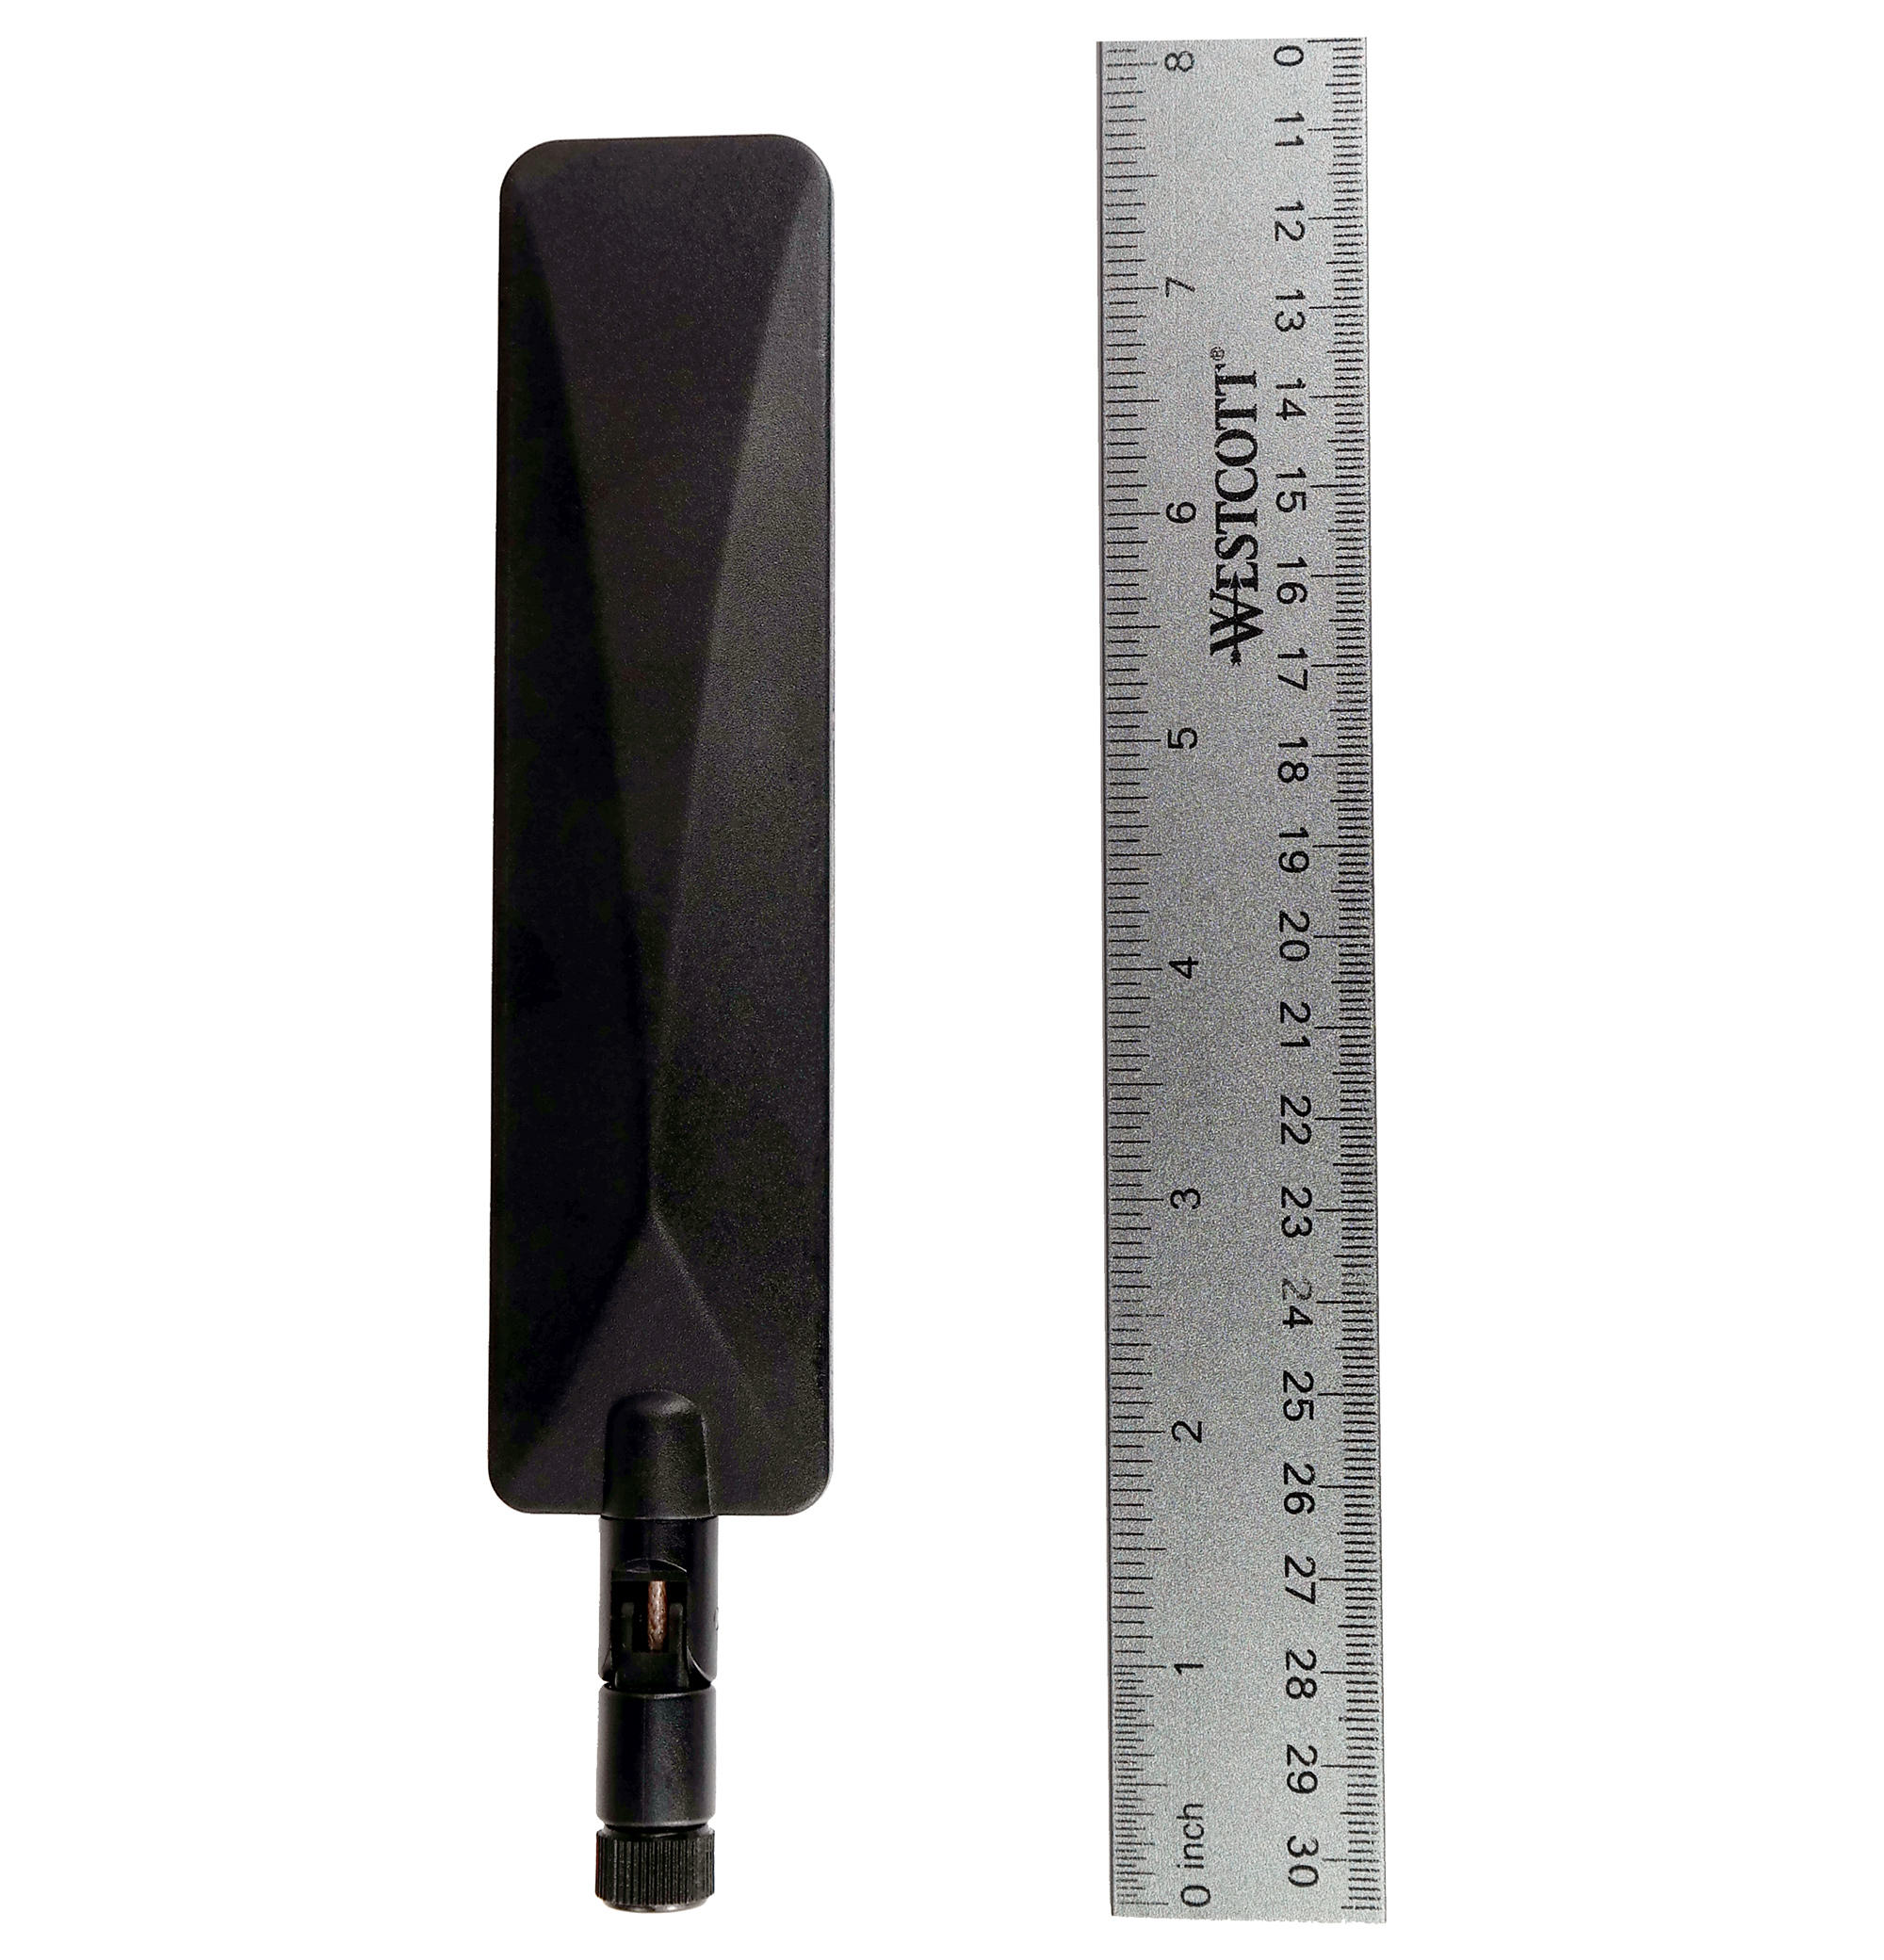 Pepwave Digi Cradlepoint Proxicast 3G/4G/LTE Universal Wide Band 5 dBi Omni-Directional Paddle Antenna for Cisco Sierra Wireless and Many Others 